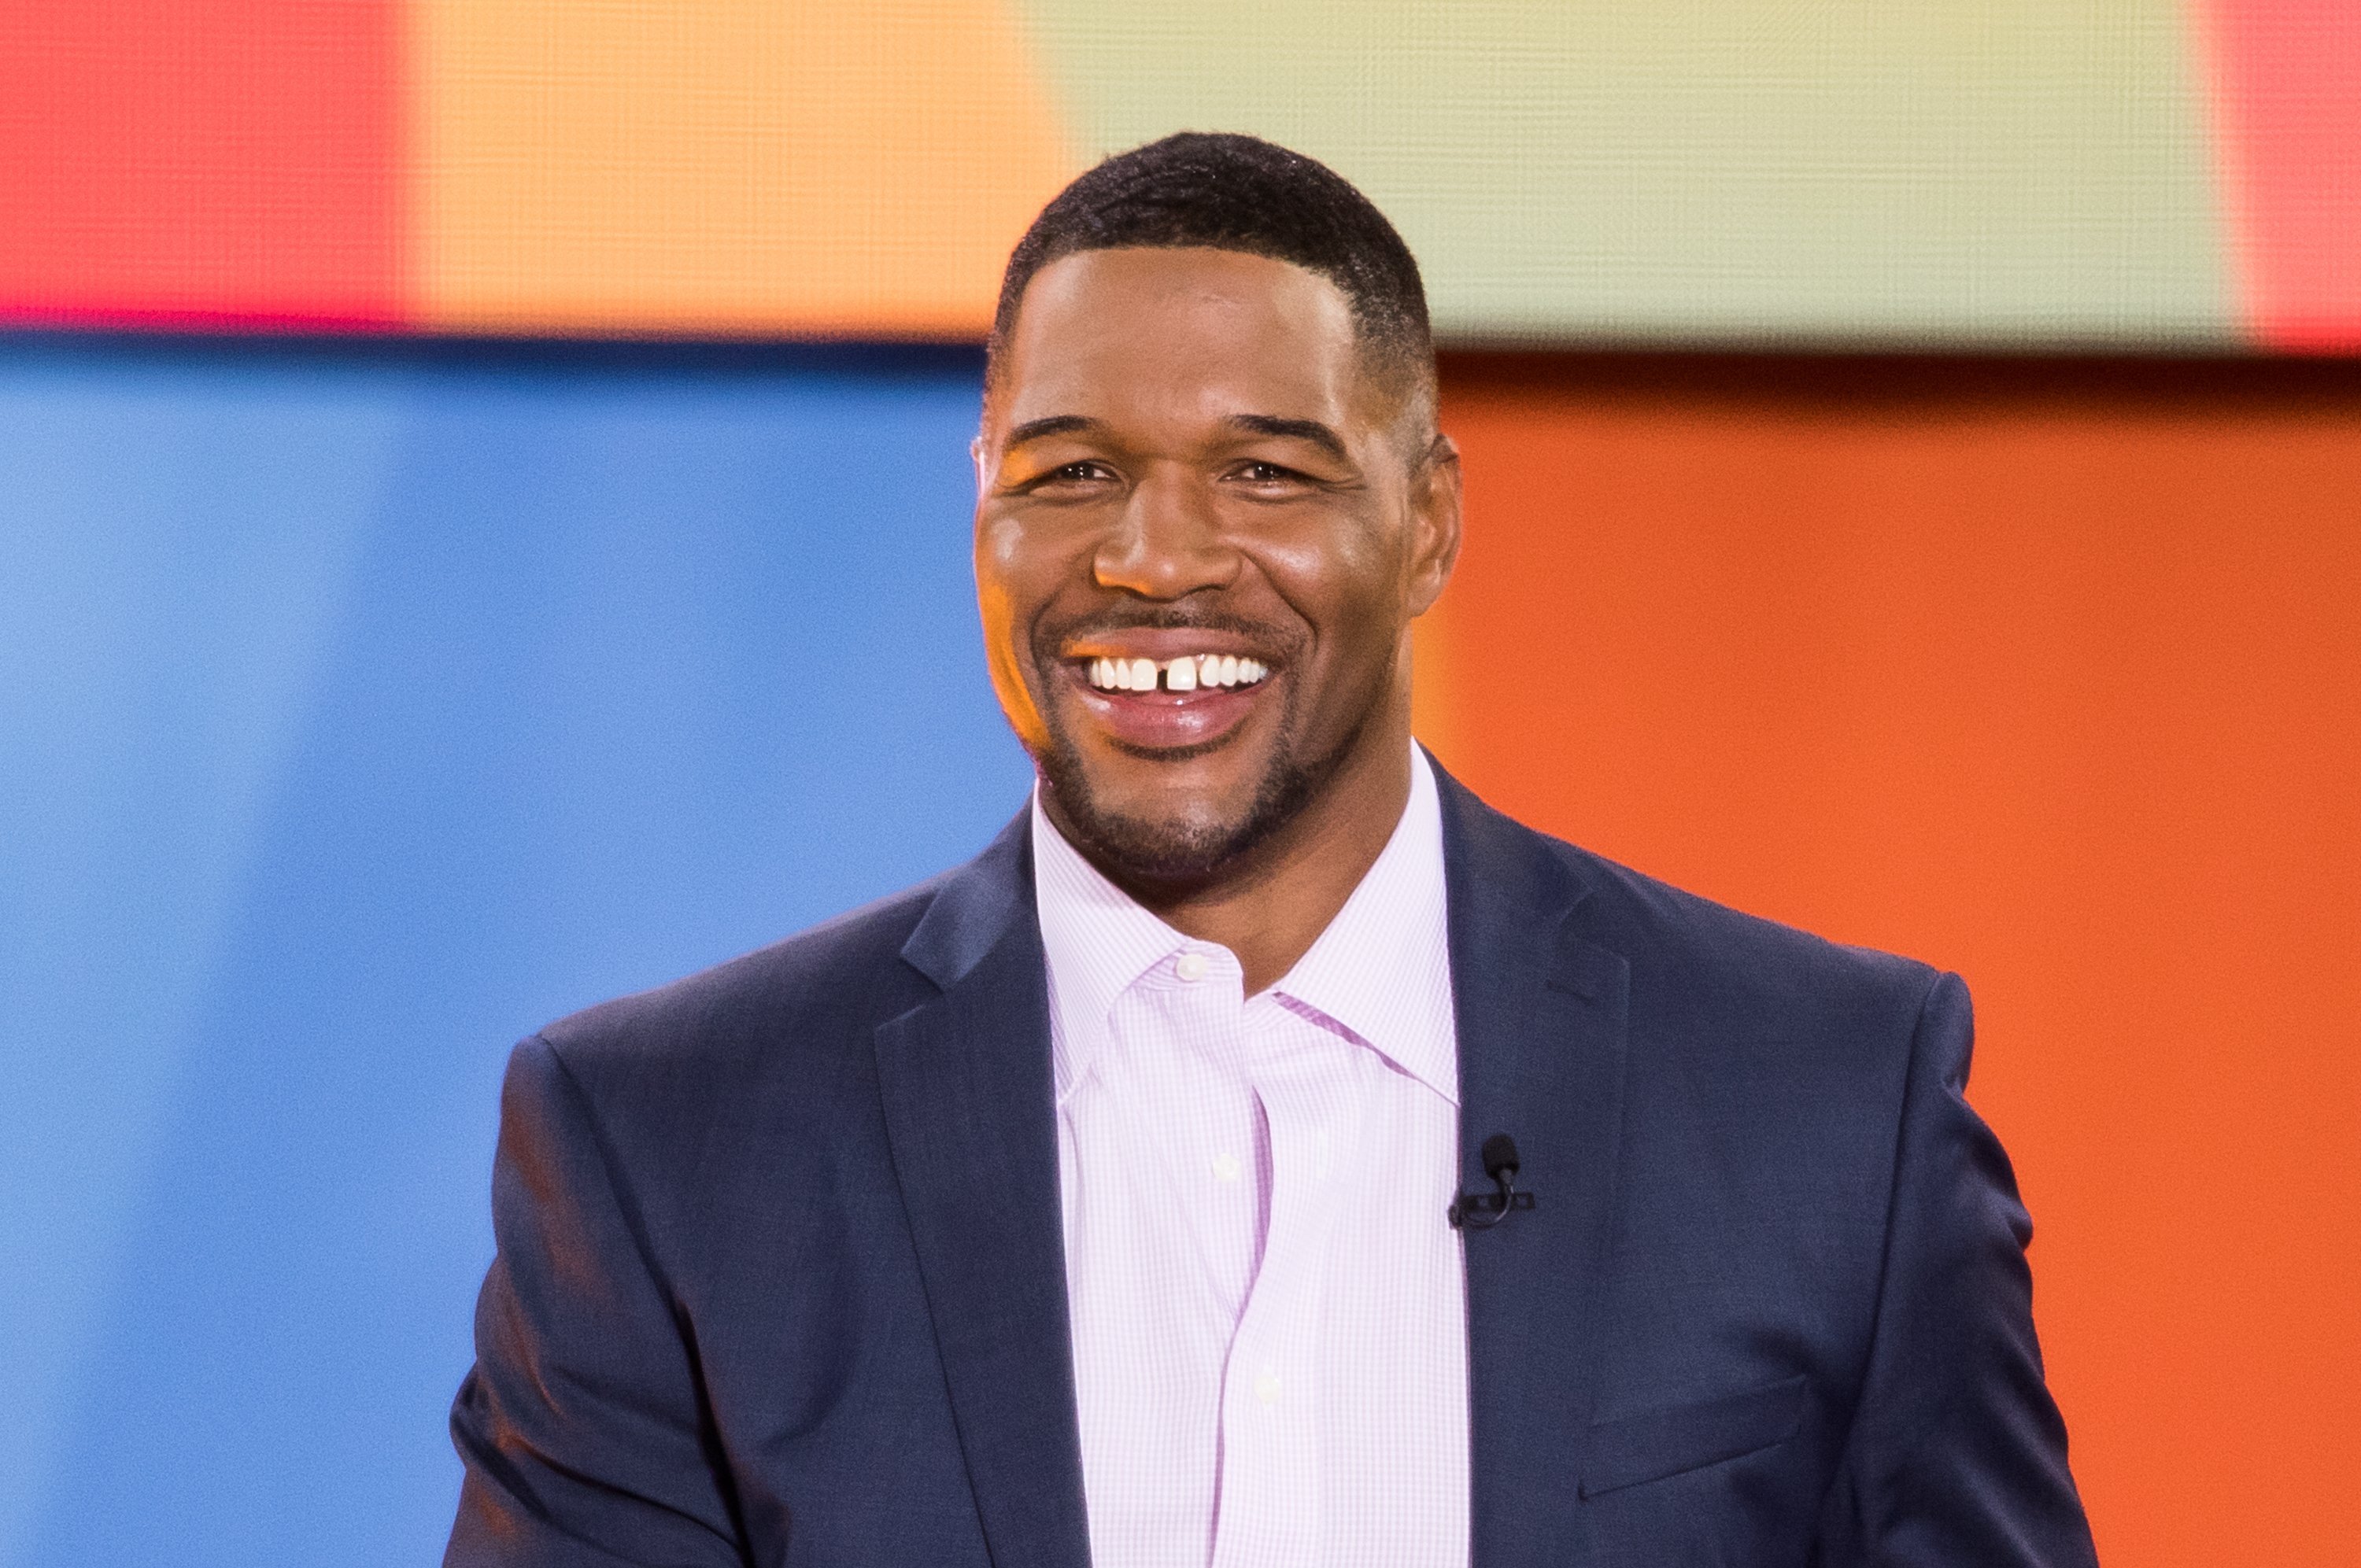 NFL star turned talk show host, Michael Strahan during a stint with "Good Morning America" in July 2018. | Photo: Getty Images